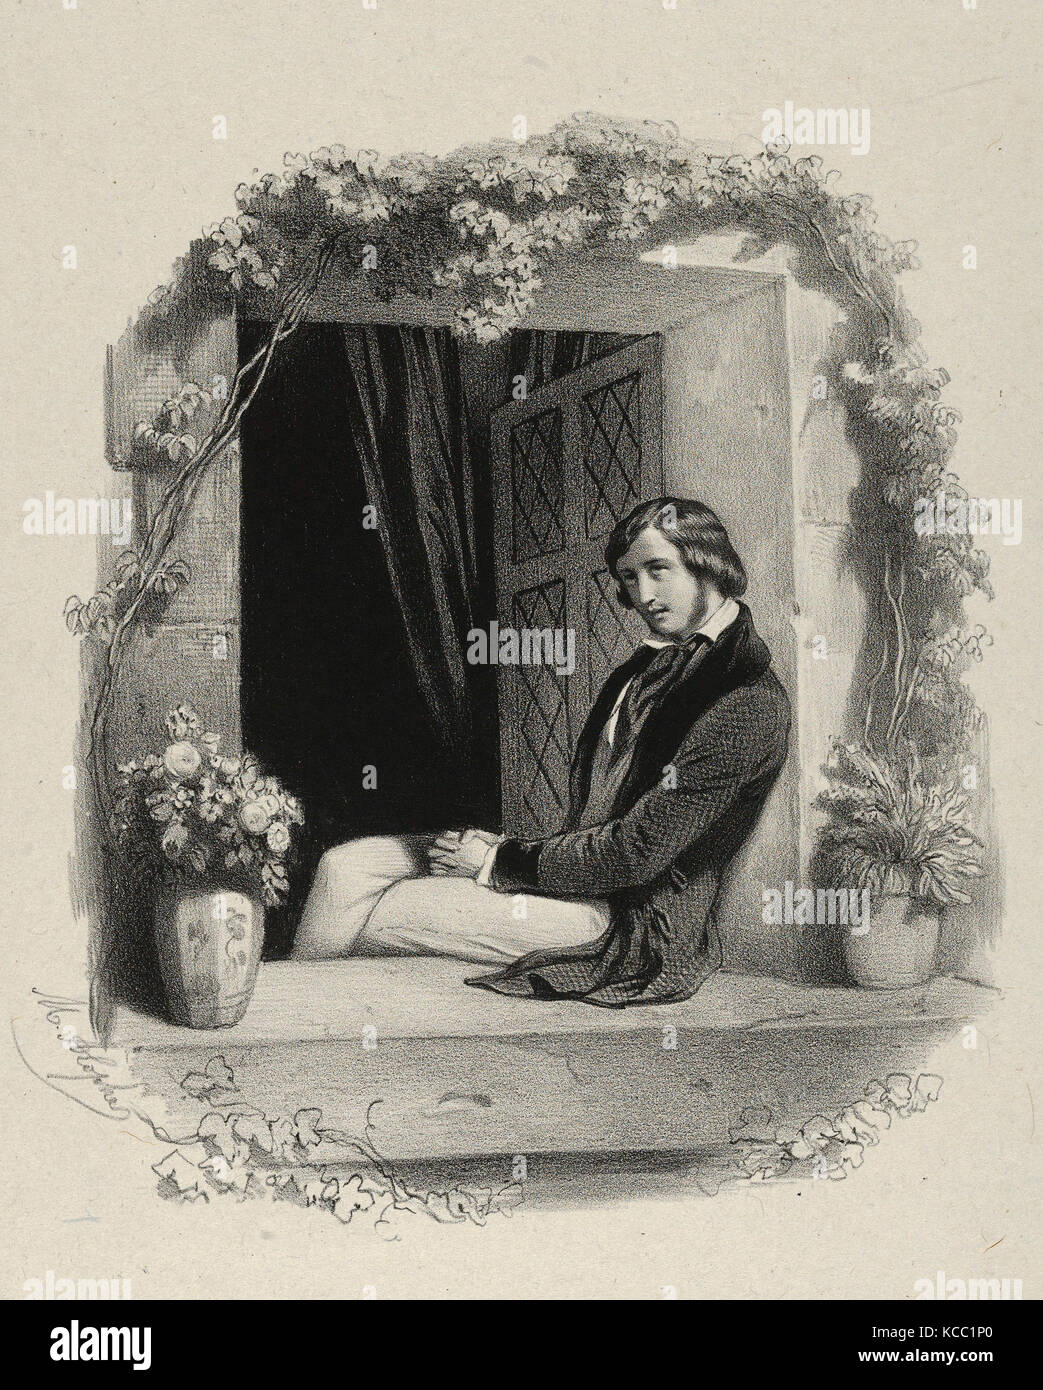 Drawings and Prints, Print, Melancholy, young man with folded hands sitting on window sill, Artist, Marie Alexandre Alophe Stock Photo